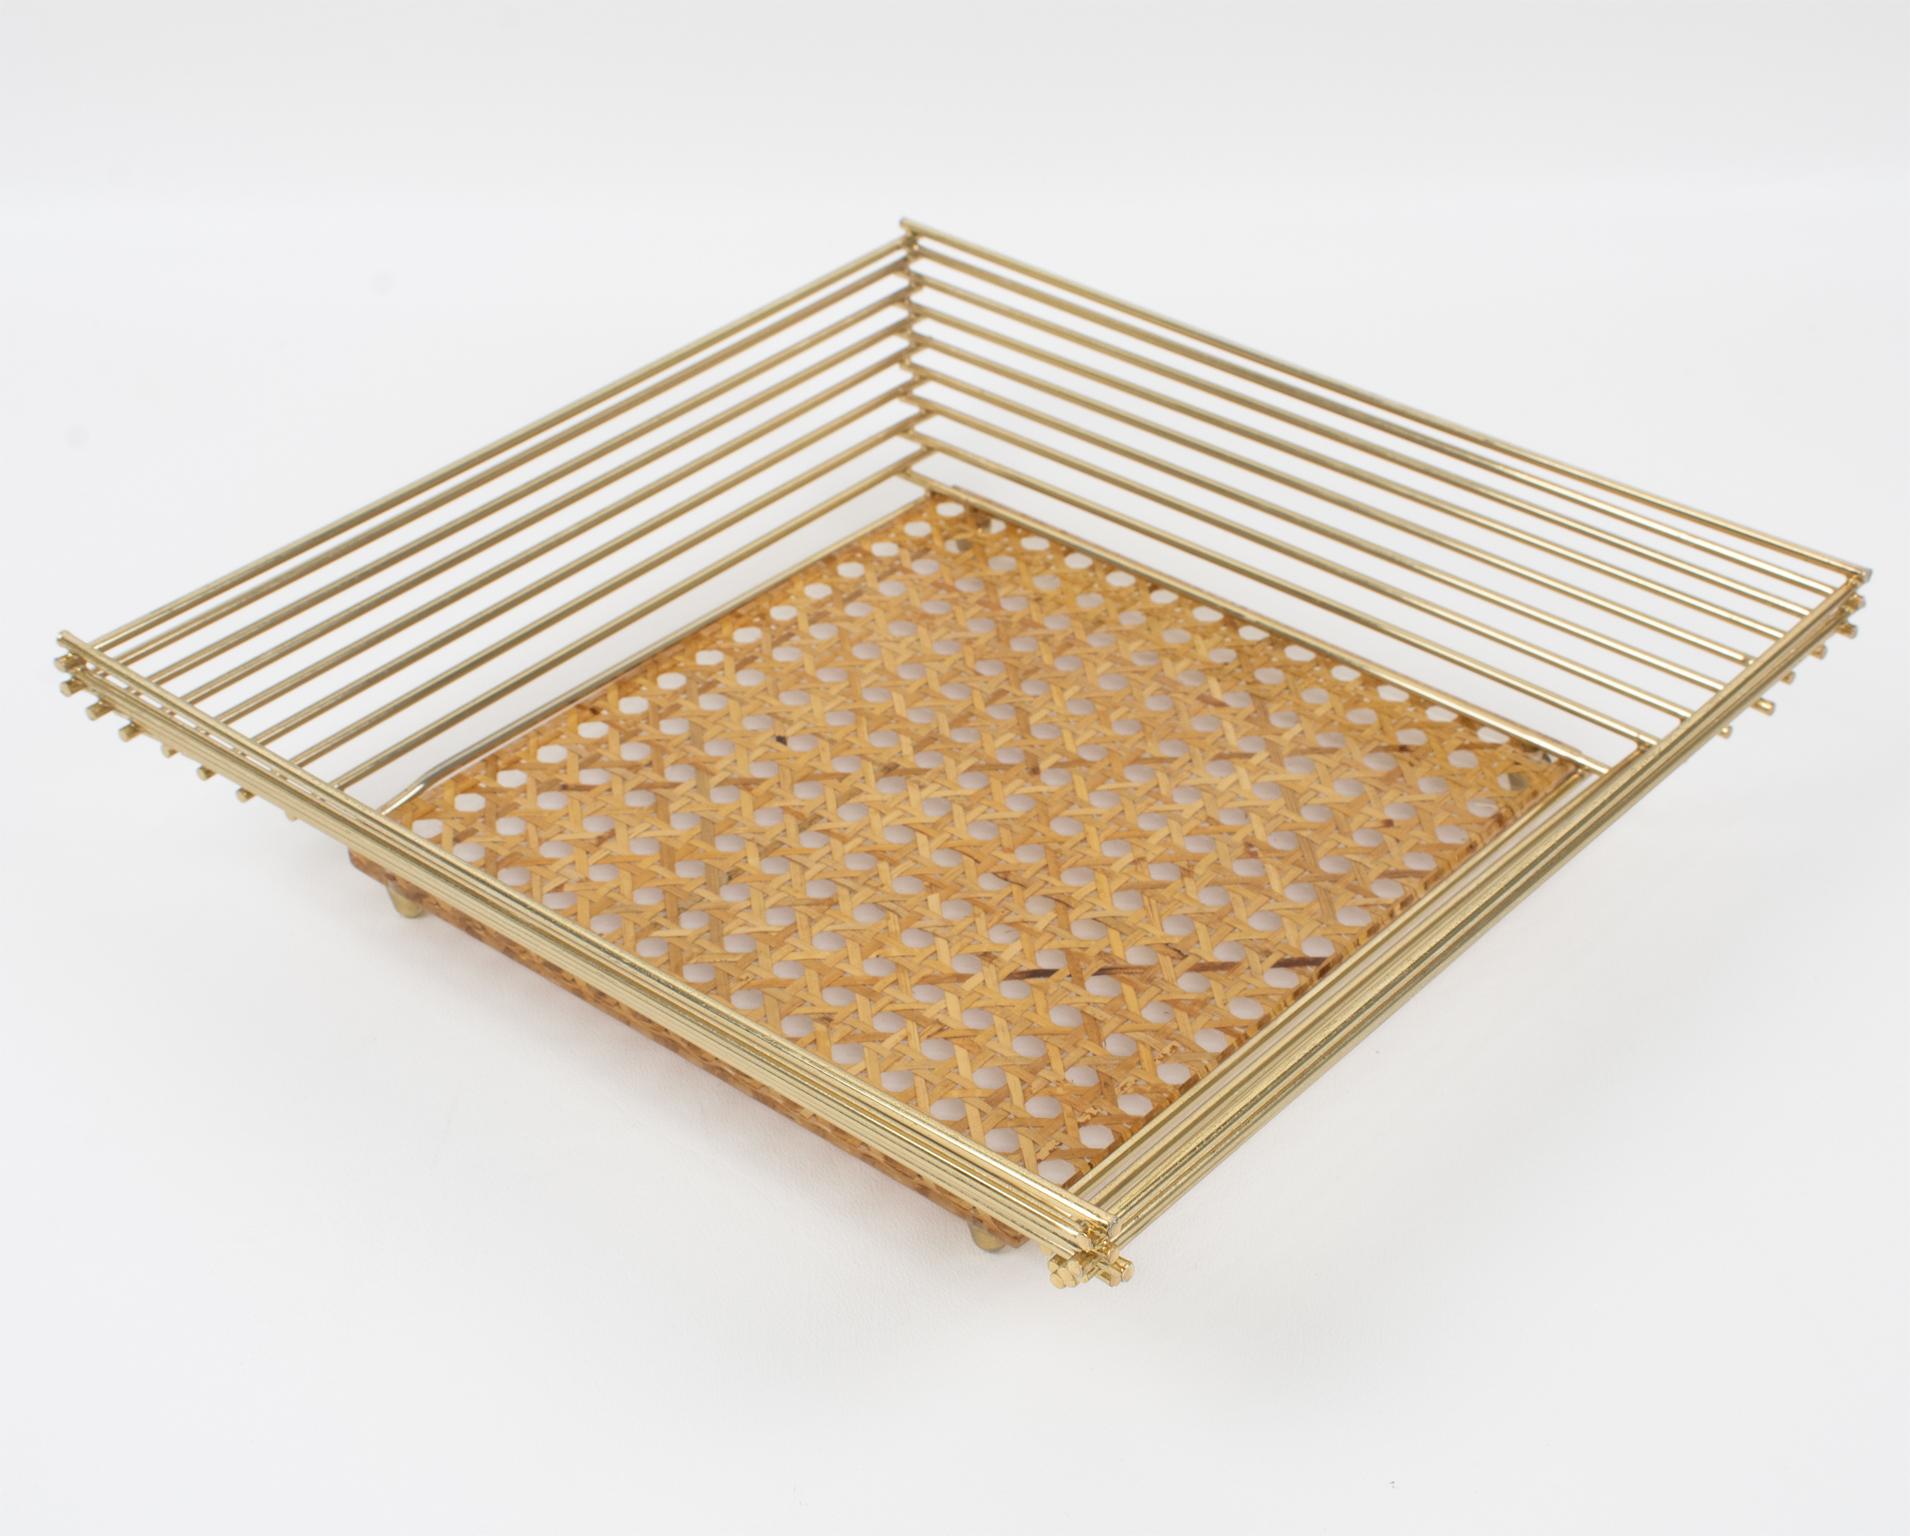 Italian Lucite, Rattan or Wicker and Brass Barware Serving Tray, Italy 1970s For Sale